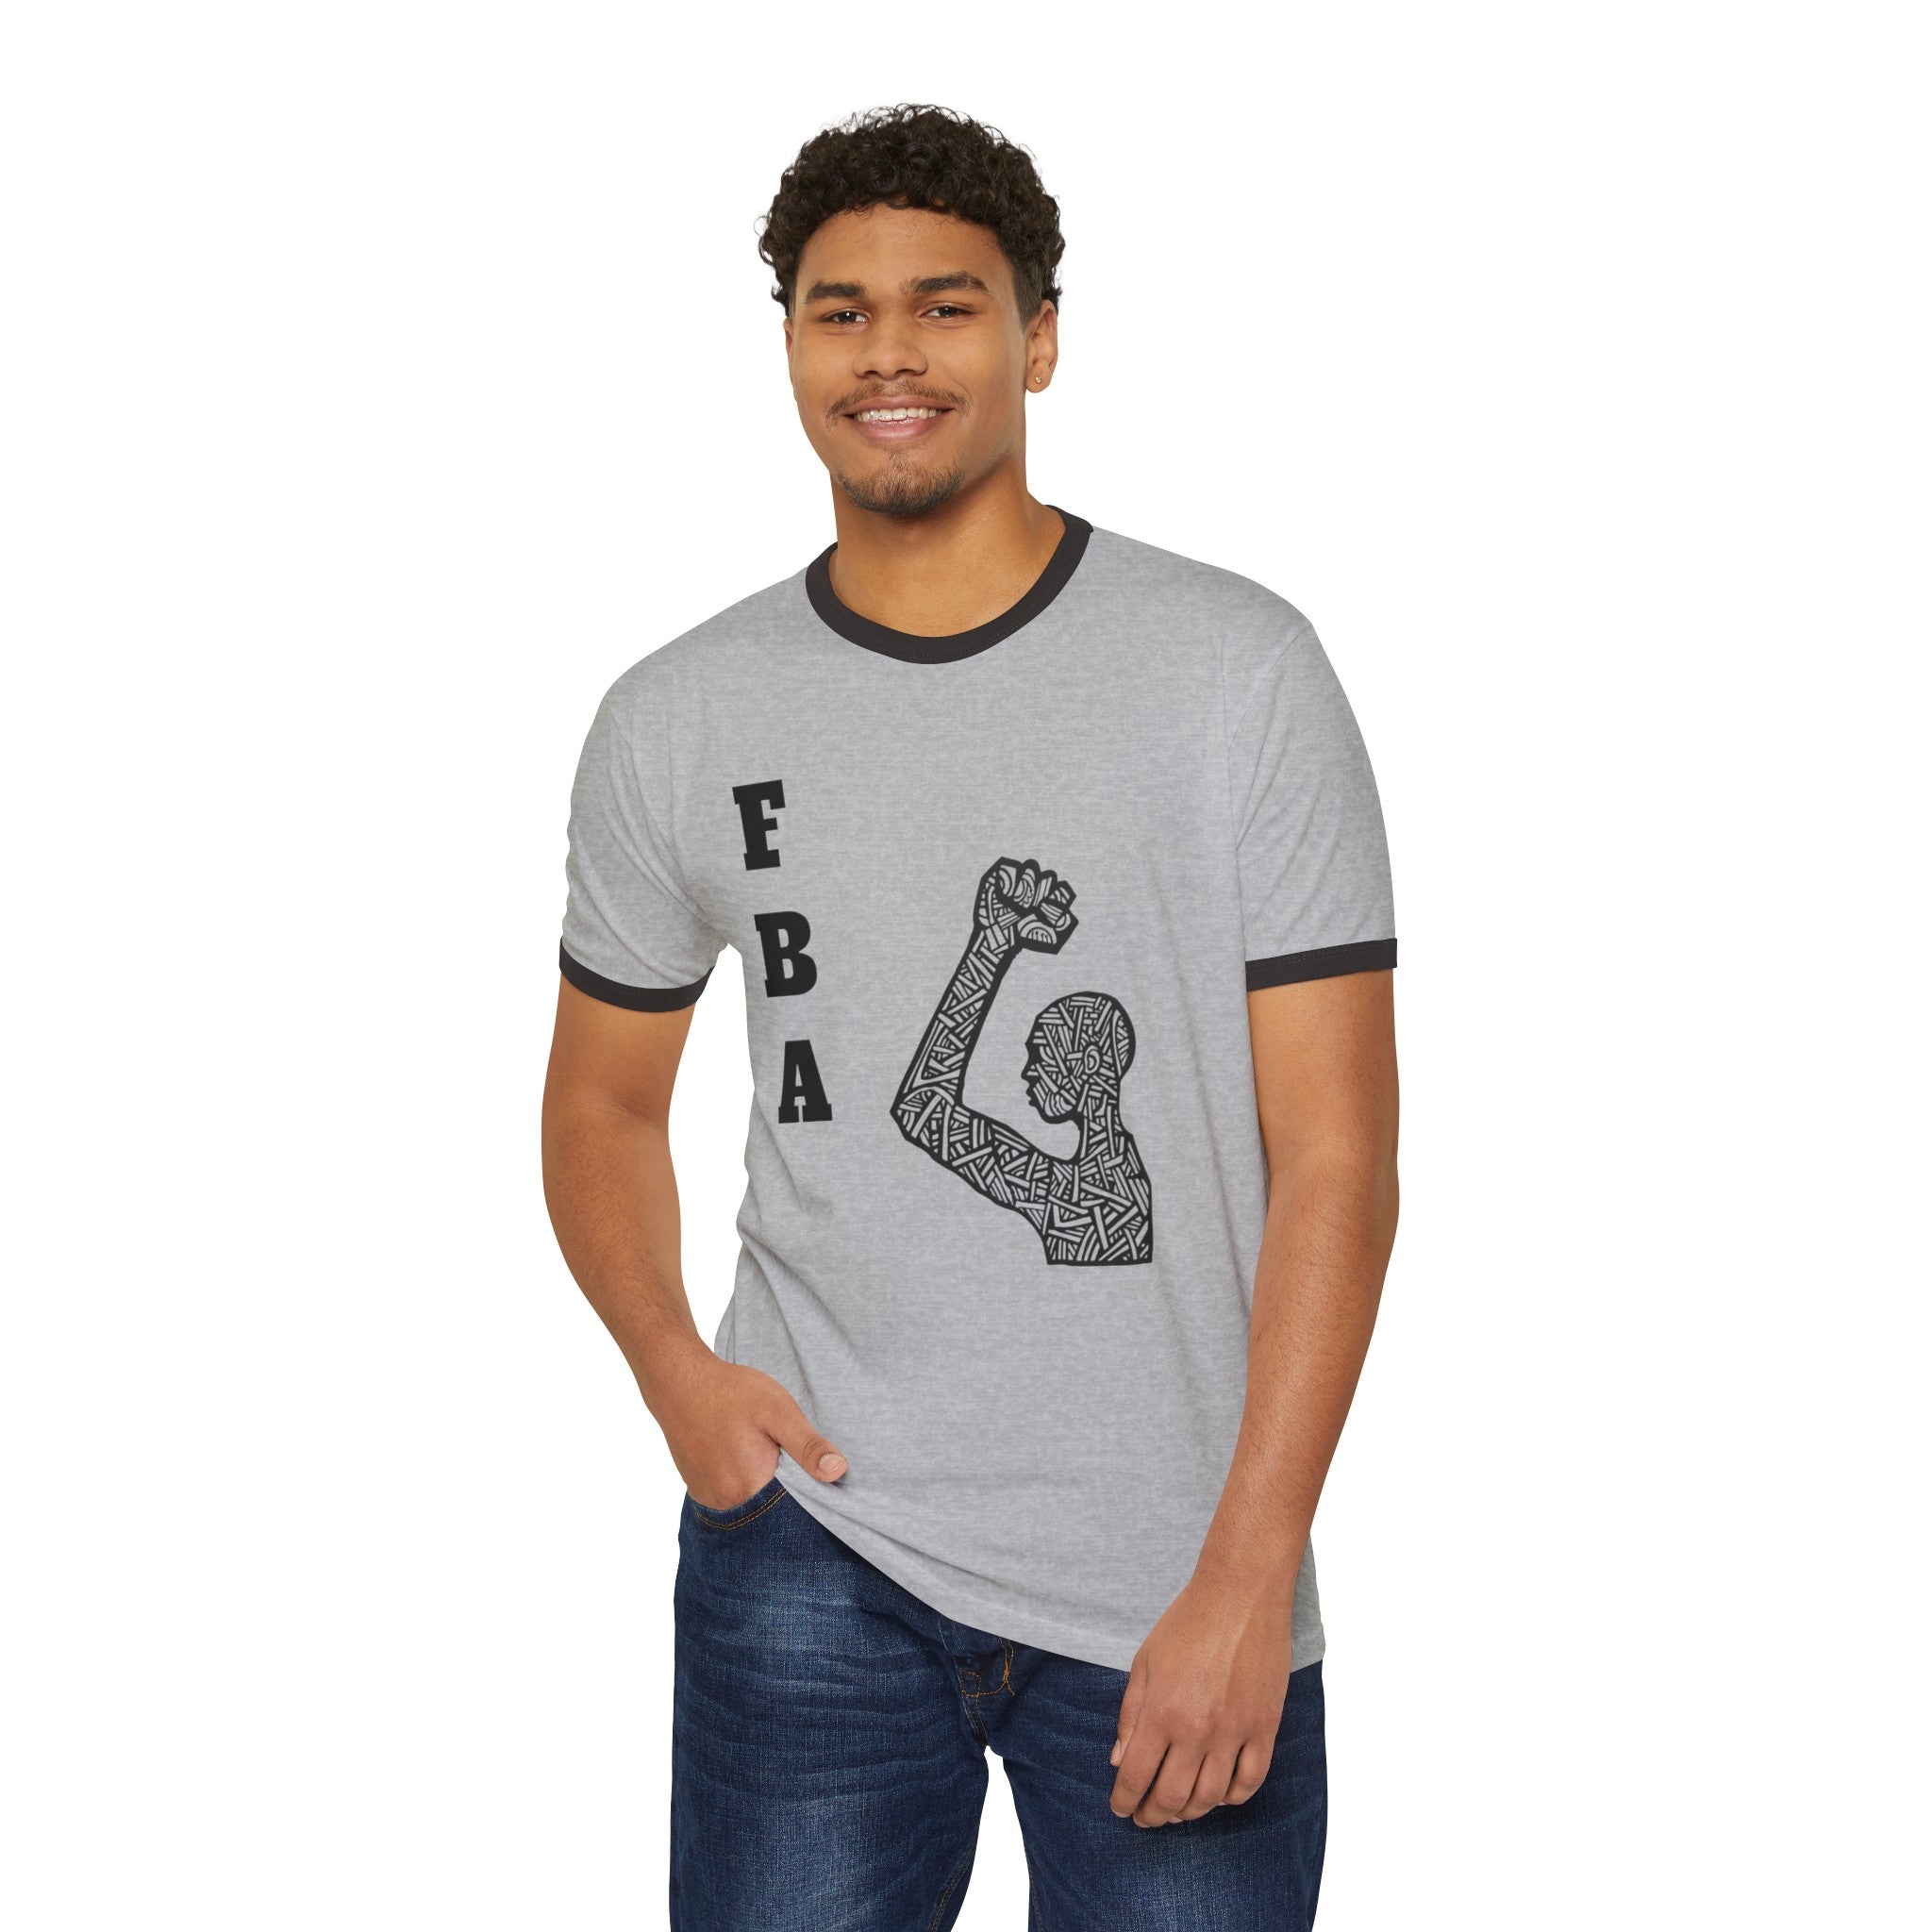 FBA Pride: Foundational Black American Heritage Unisex Cotton Ringer T-Shirt - Celebrate Your Roots